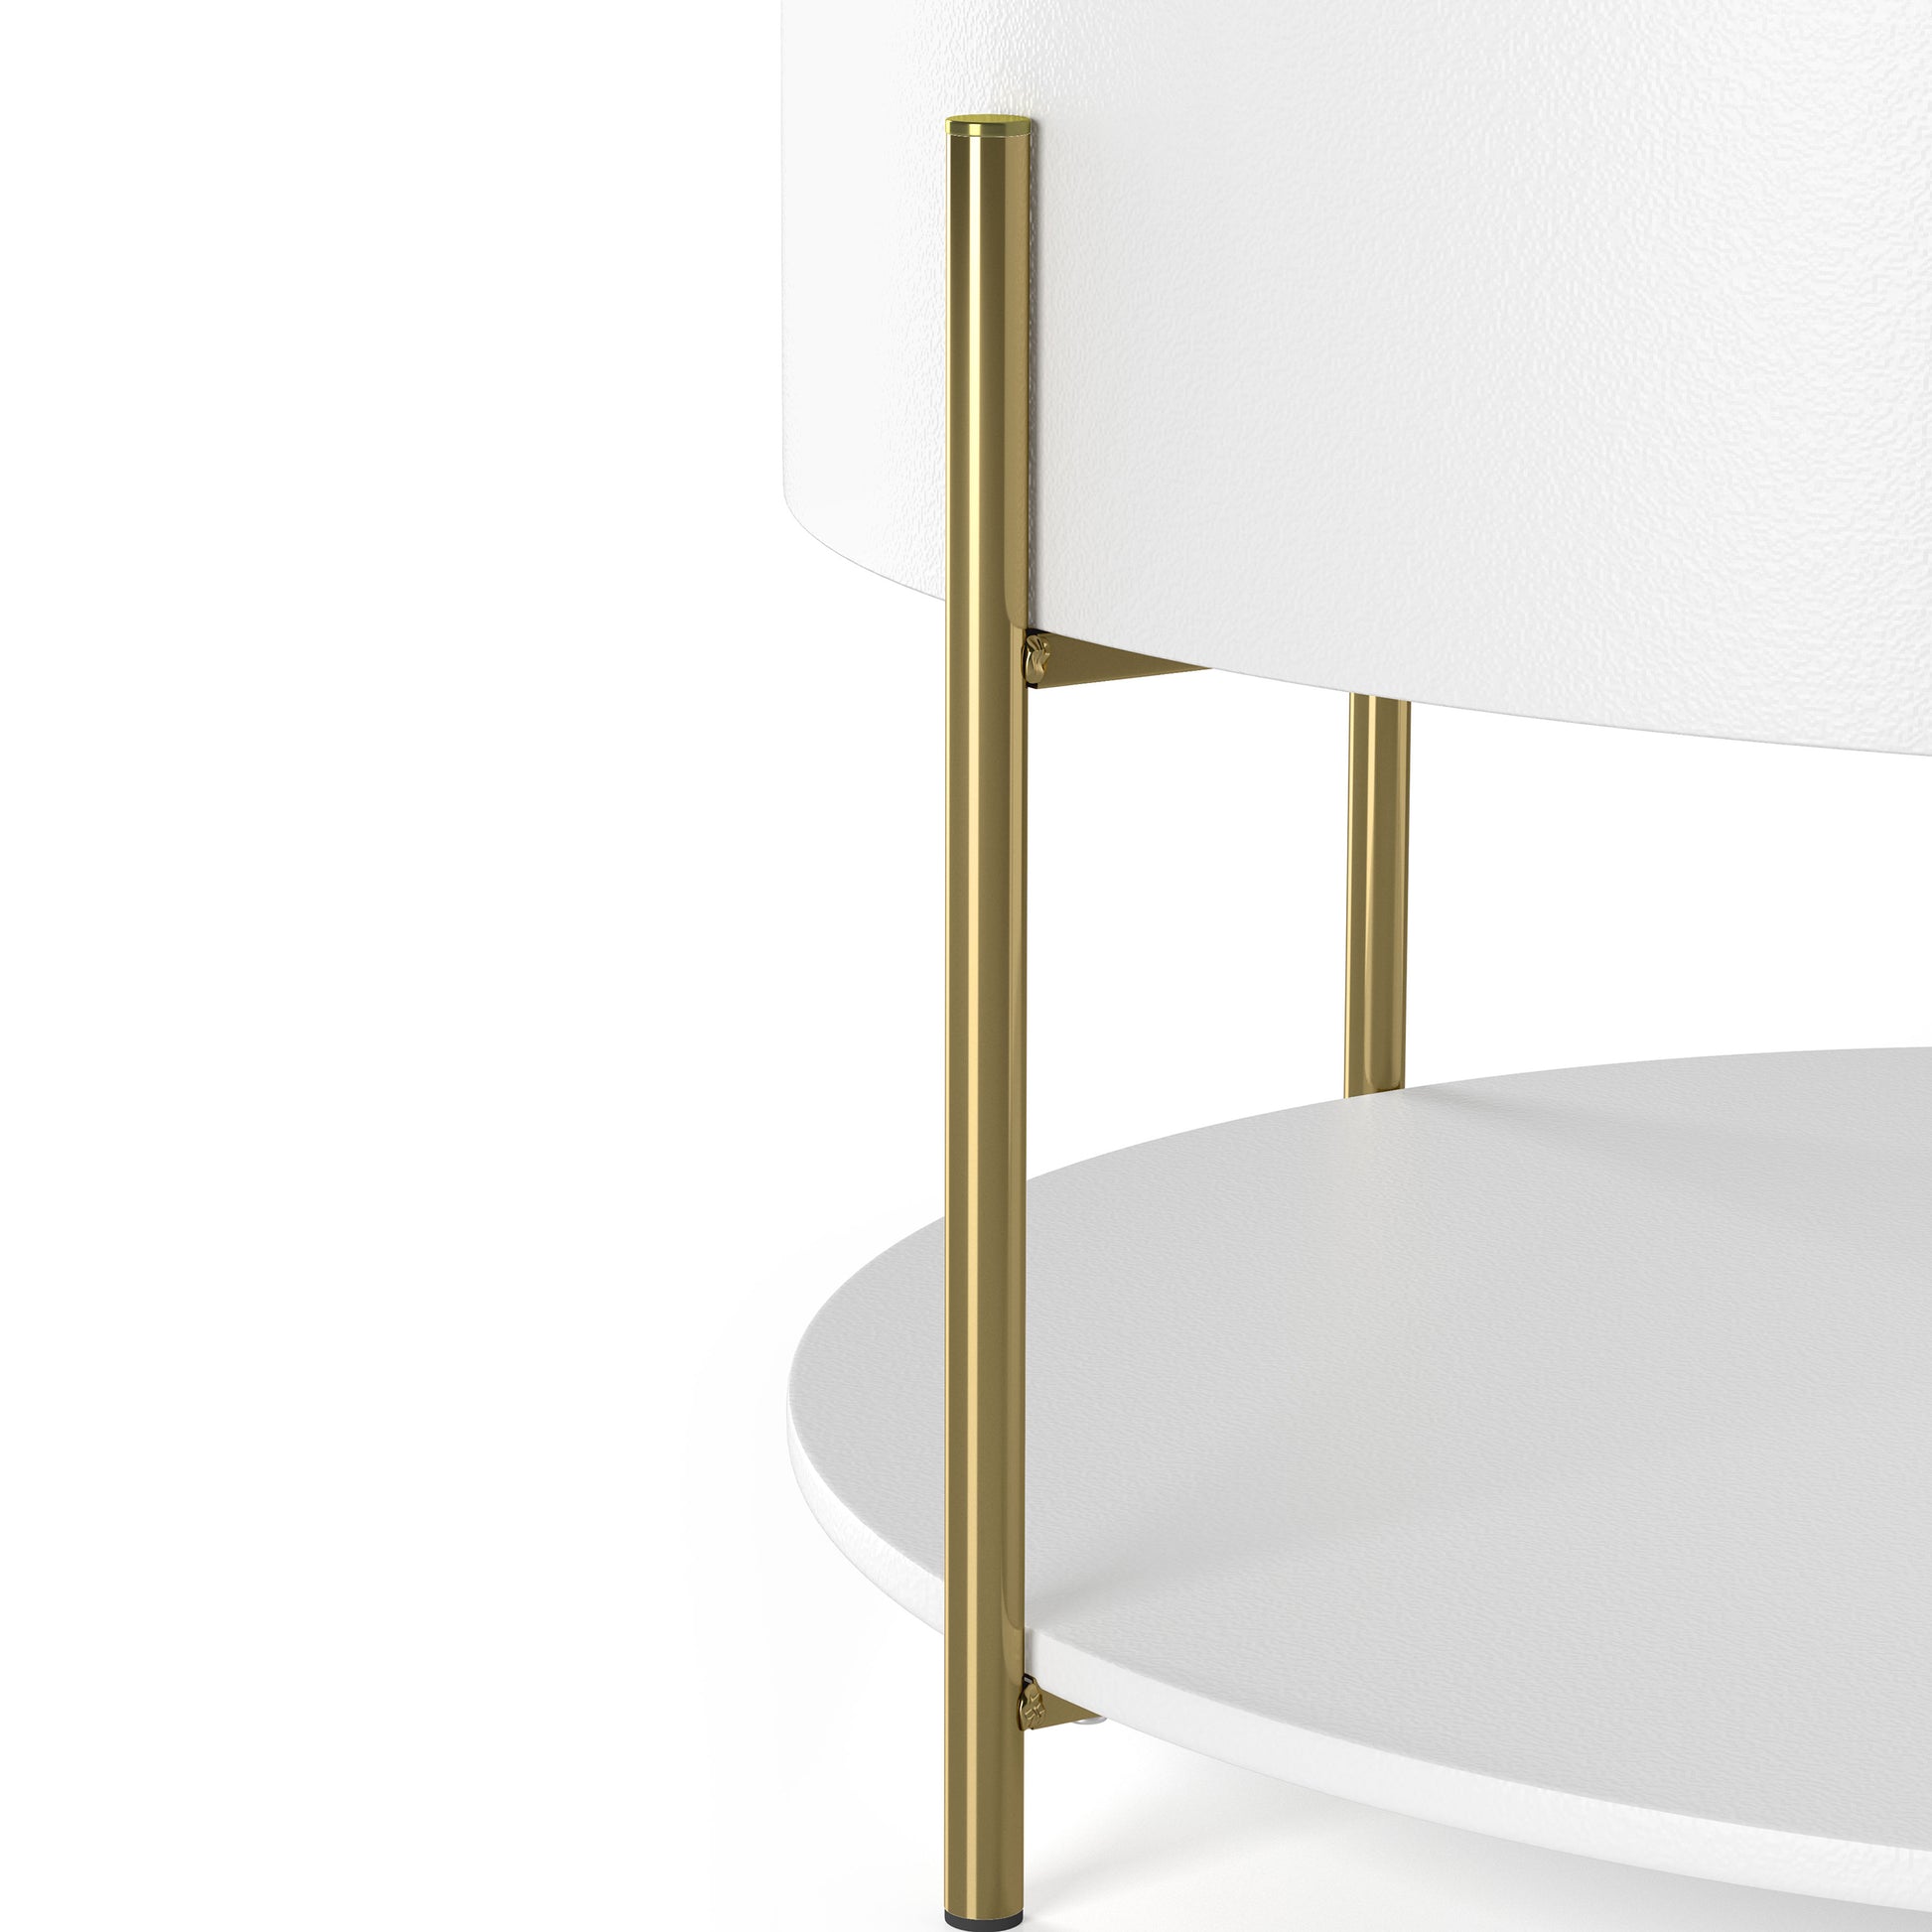 Angled modern close-up leg view of a white and gold round storage coffee table on a white background